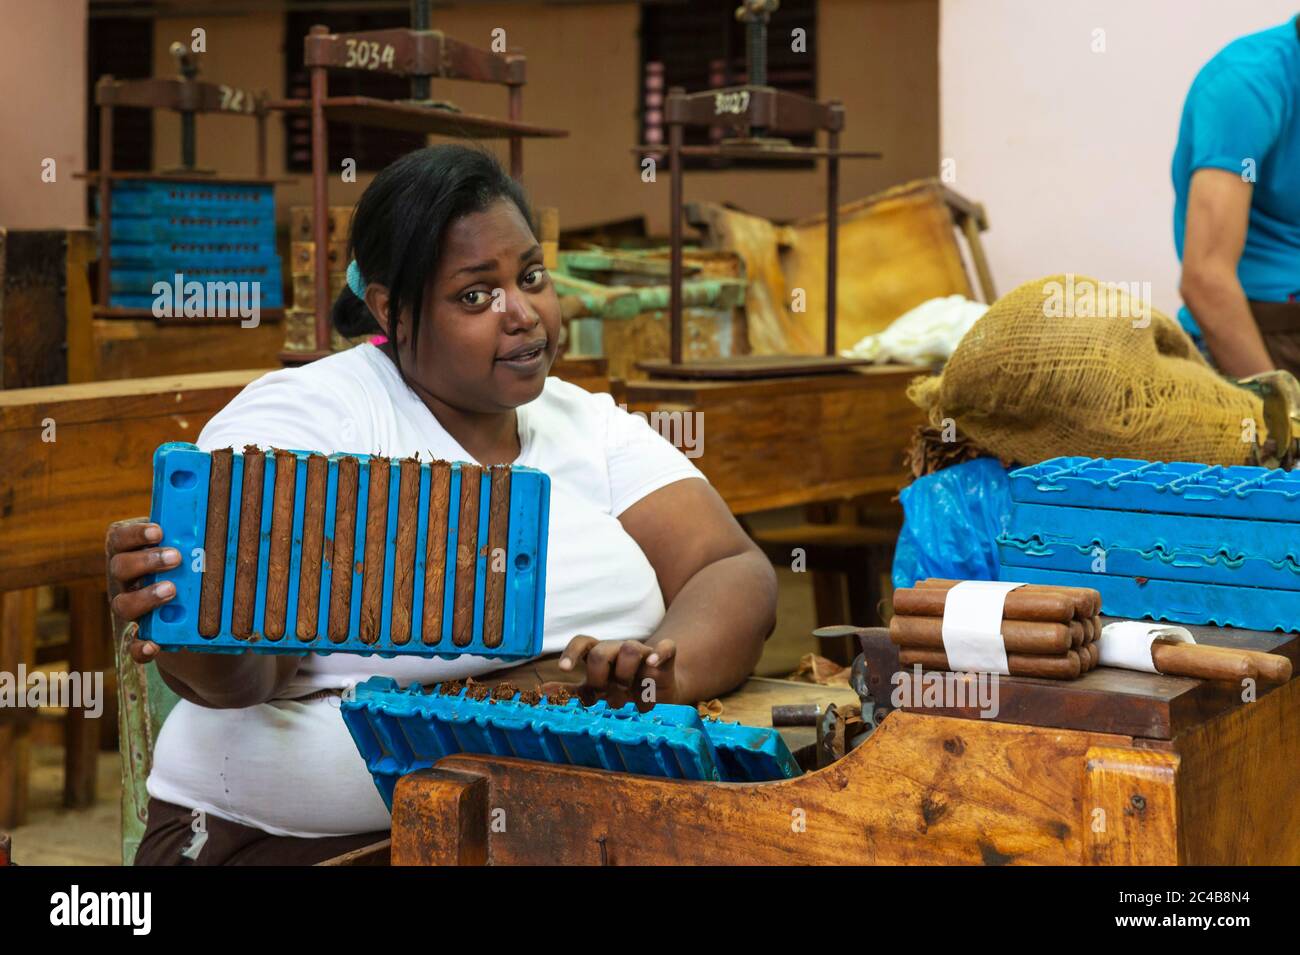 Worker shows cigars, cigar factory in Remedios, Cuba Stock Photo